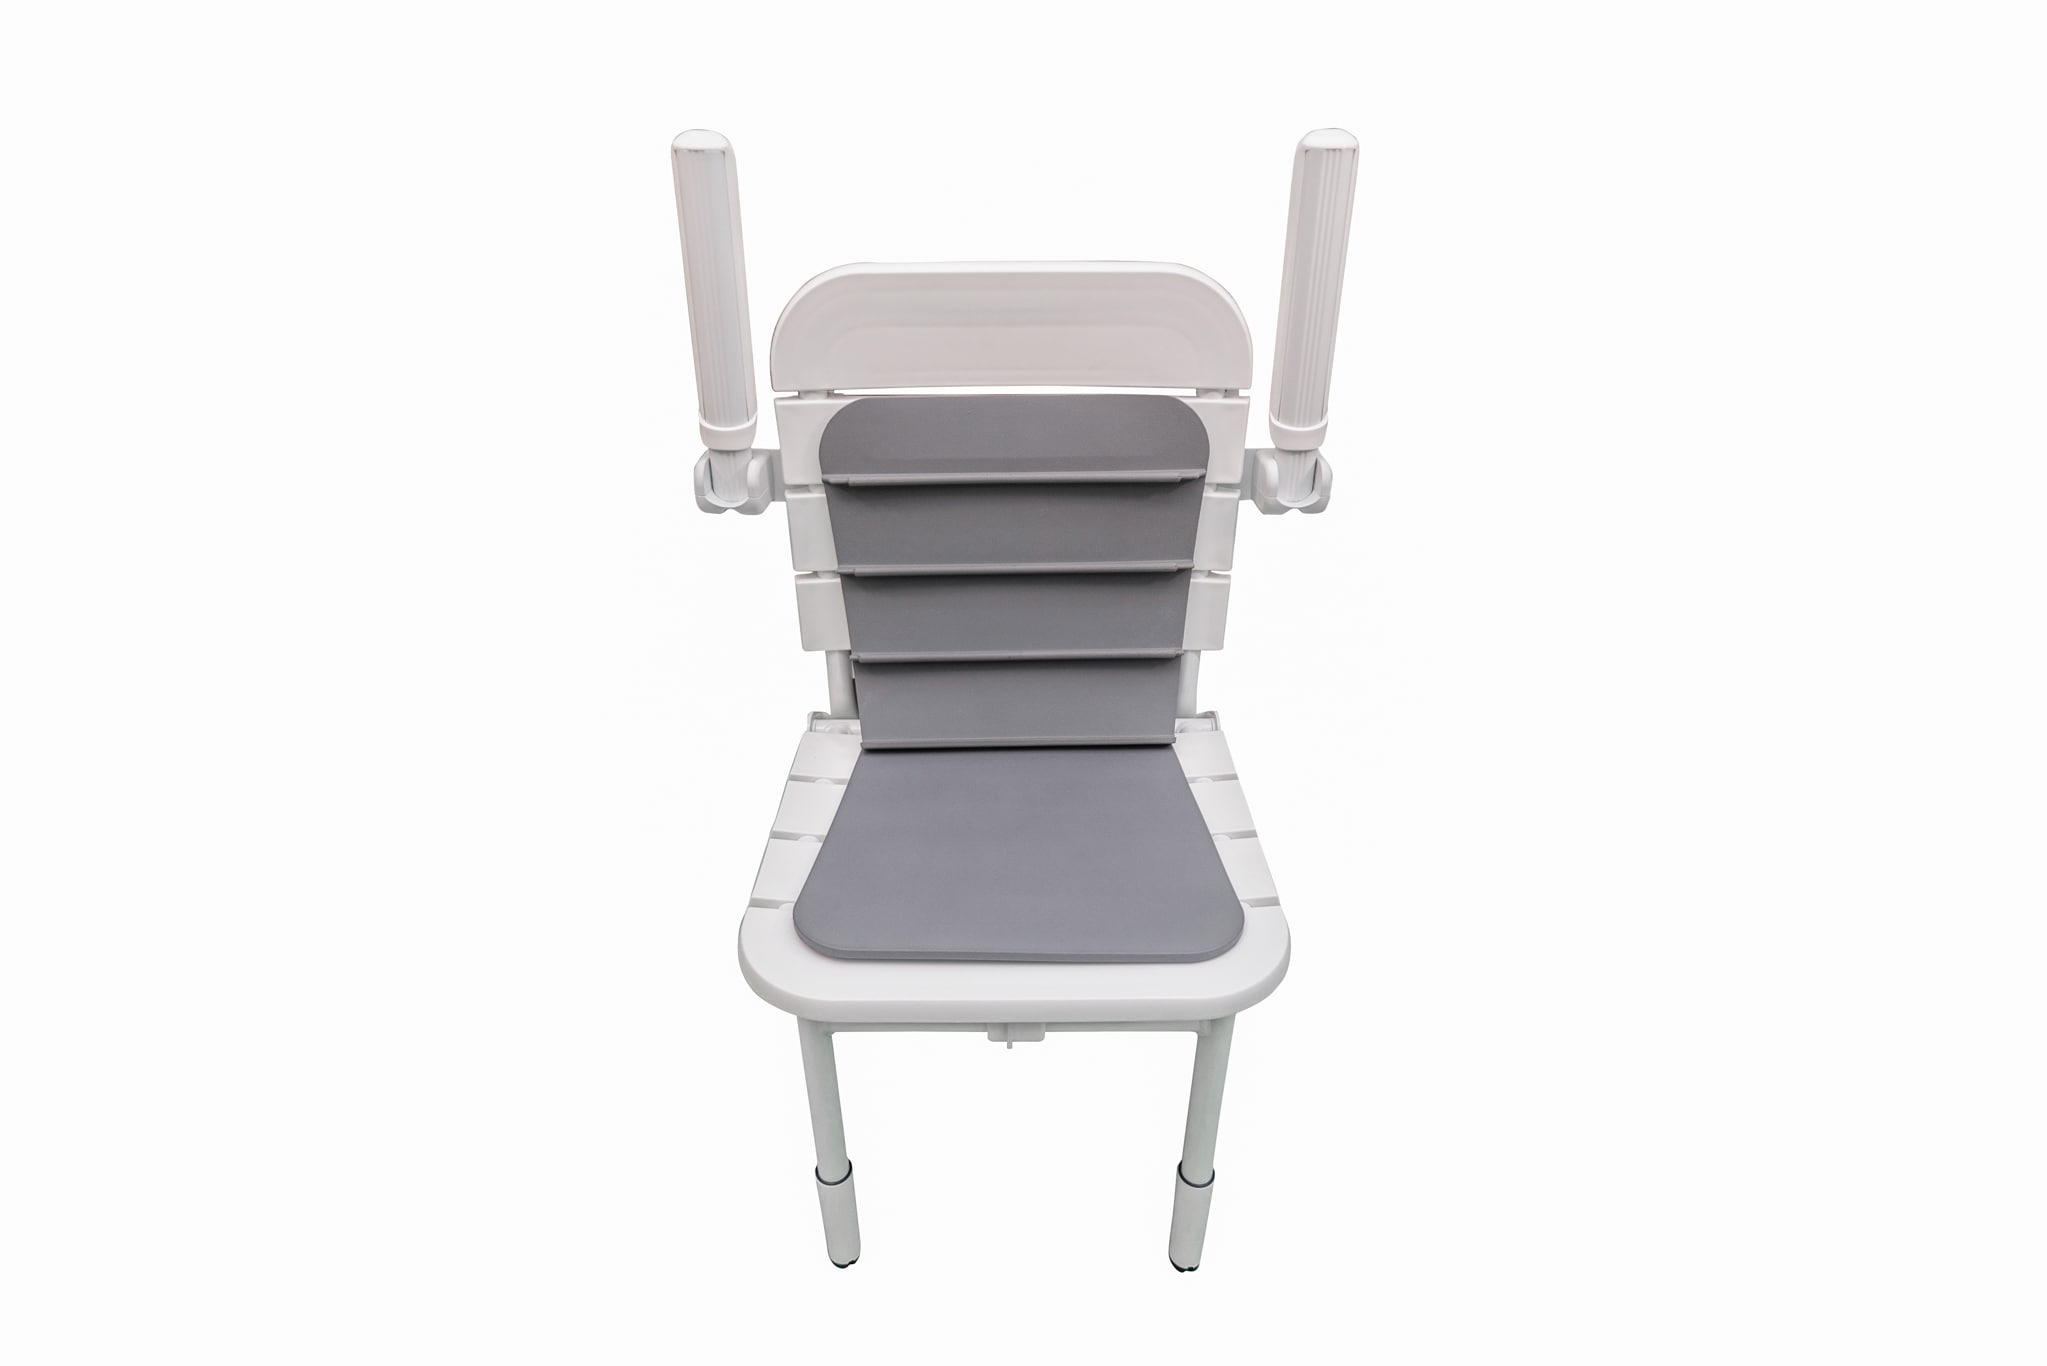 Comfortique 18in Wide Aluminum Shower Safety Seat - DBI-047825